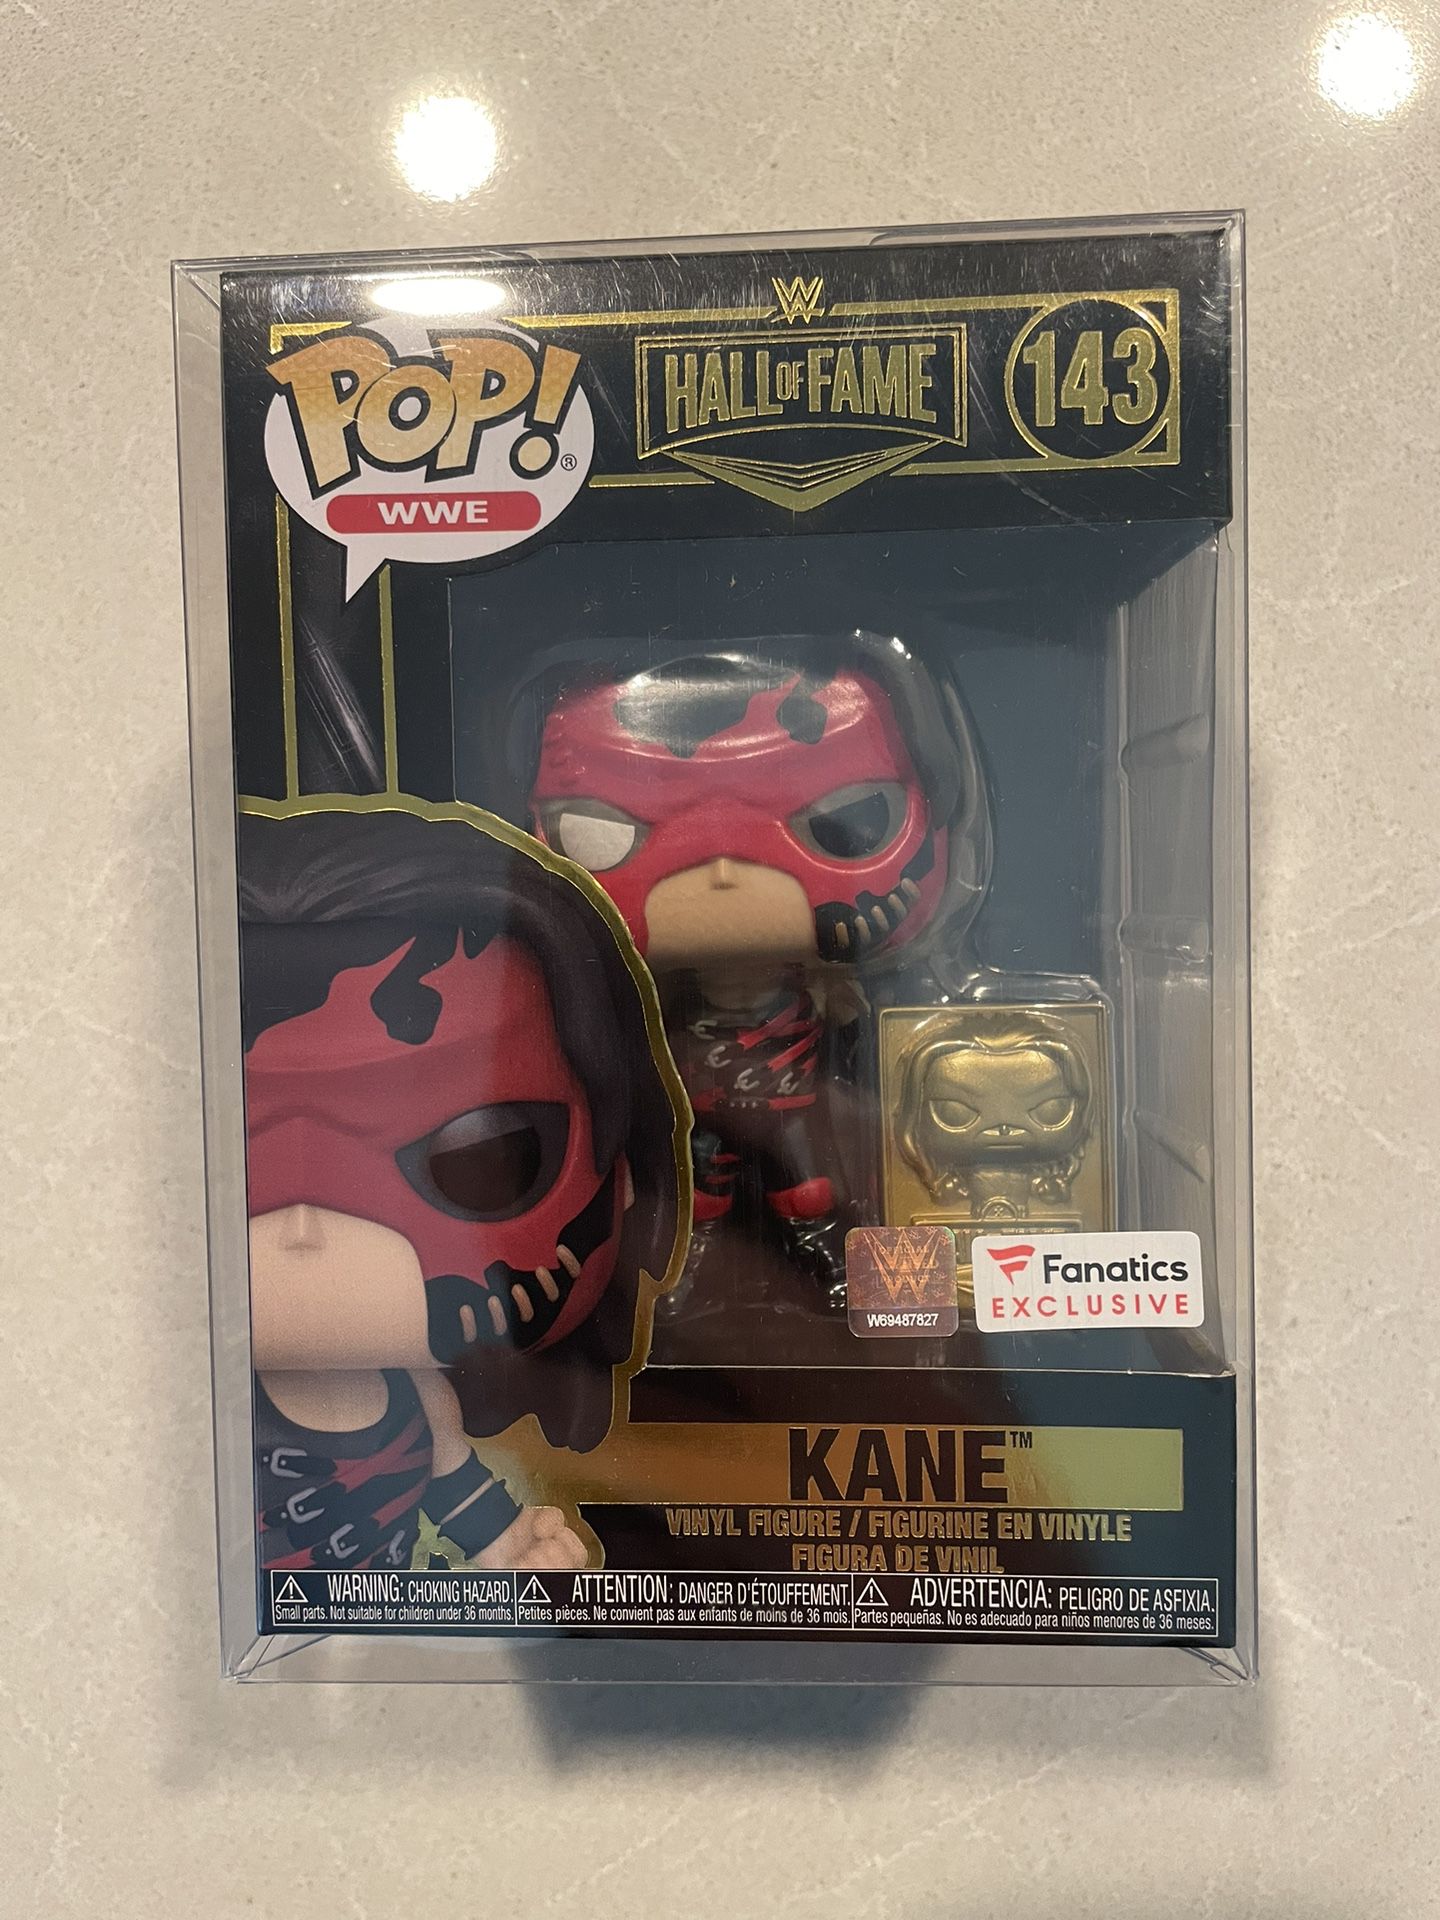 Kane Hall of Fame LE5000 Funko Pop *MINT* Fanatics Exclusive Limited Edition 5000 Pcs WWE 143 with protector Wrestling